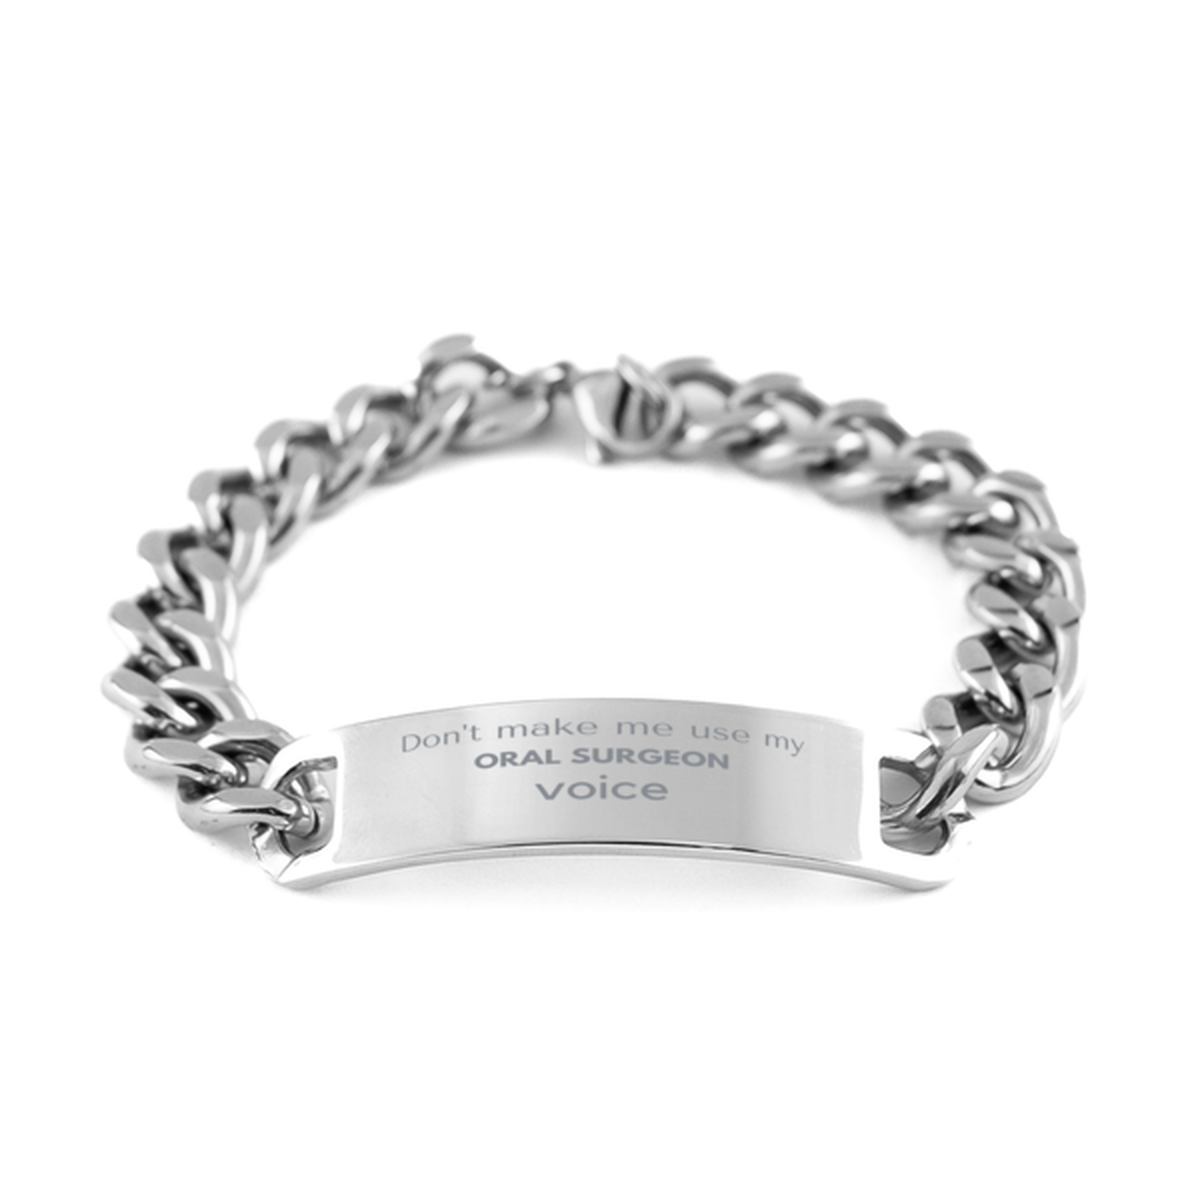 Don't make me use my Oral Surgeon voice, Sarcasm Oral Surgeon Gifts, Christmas Oral Surgeon Cuban Chain Stainless Steel Bracelet Birthday Unique Gifts For Oral Surgeon Coworkers, Men, Women, Colleague, Friends